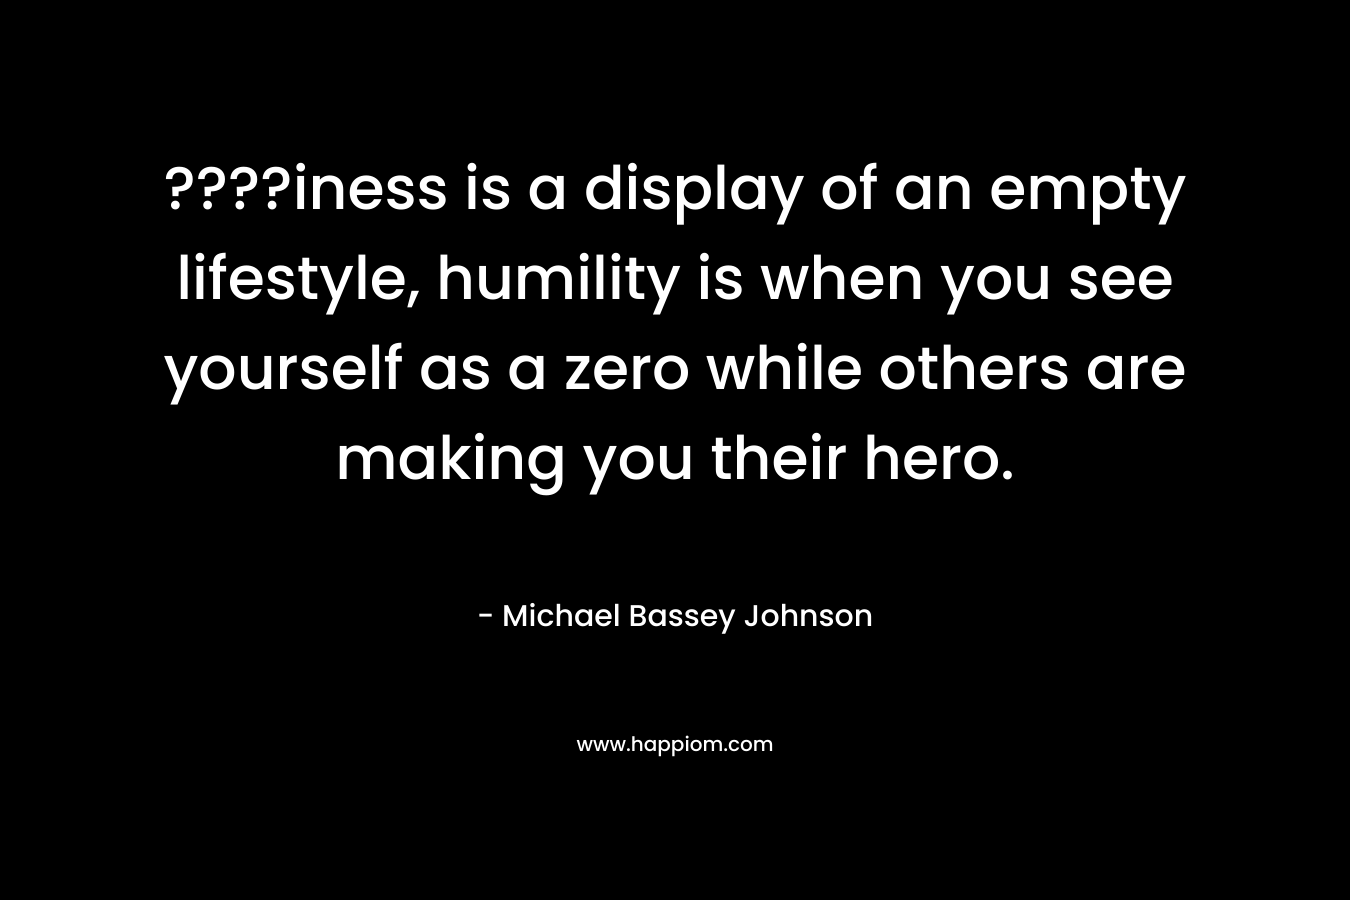 ????iness is a display of an empty lifestyle, humility is when you see yourself as a zero while others are making you their hero. – Michael Bassey Johnson